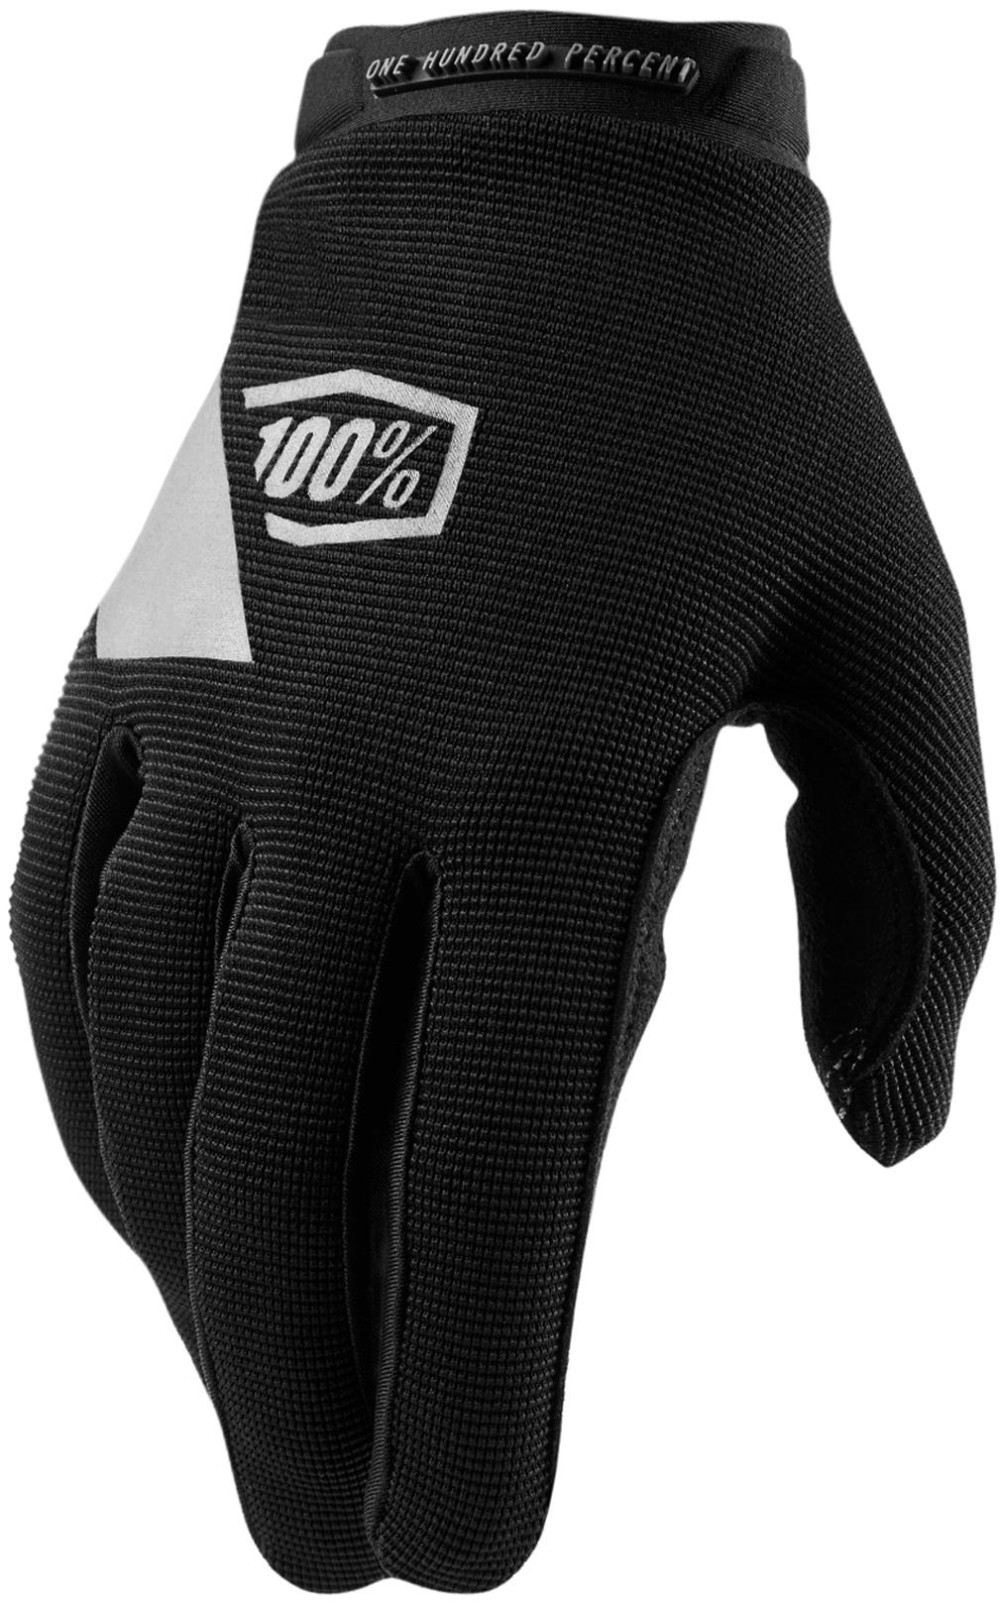 Ridecamp Womens Long Finger MTB Cycling Gloves image 0